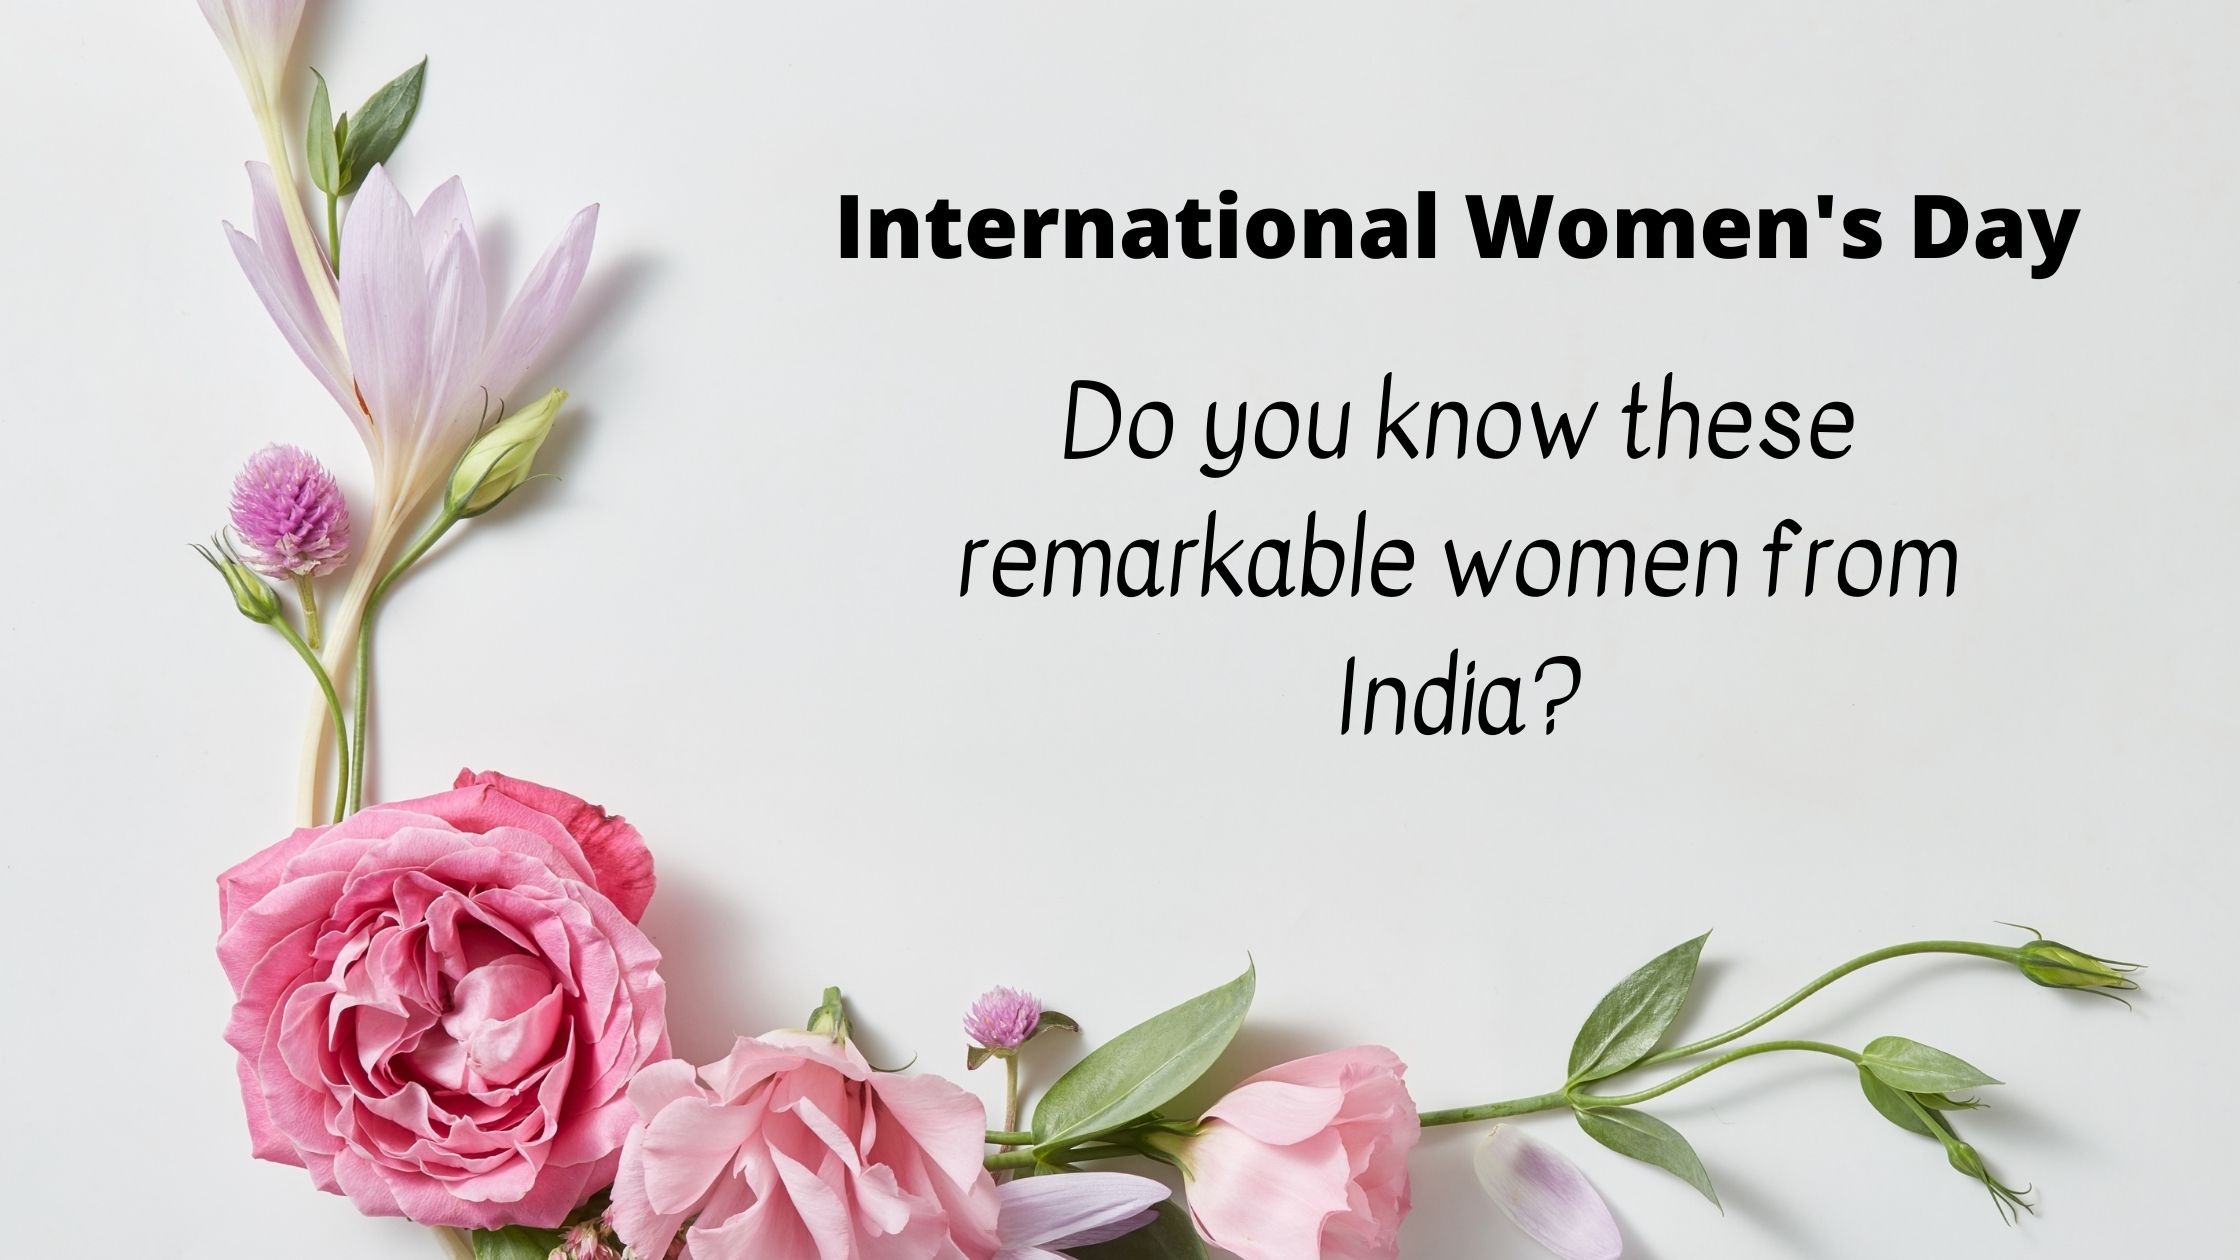 Do you know these remarkable women from India?